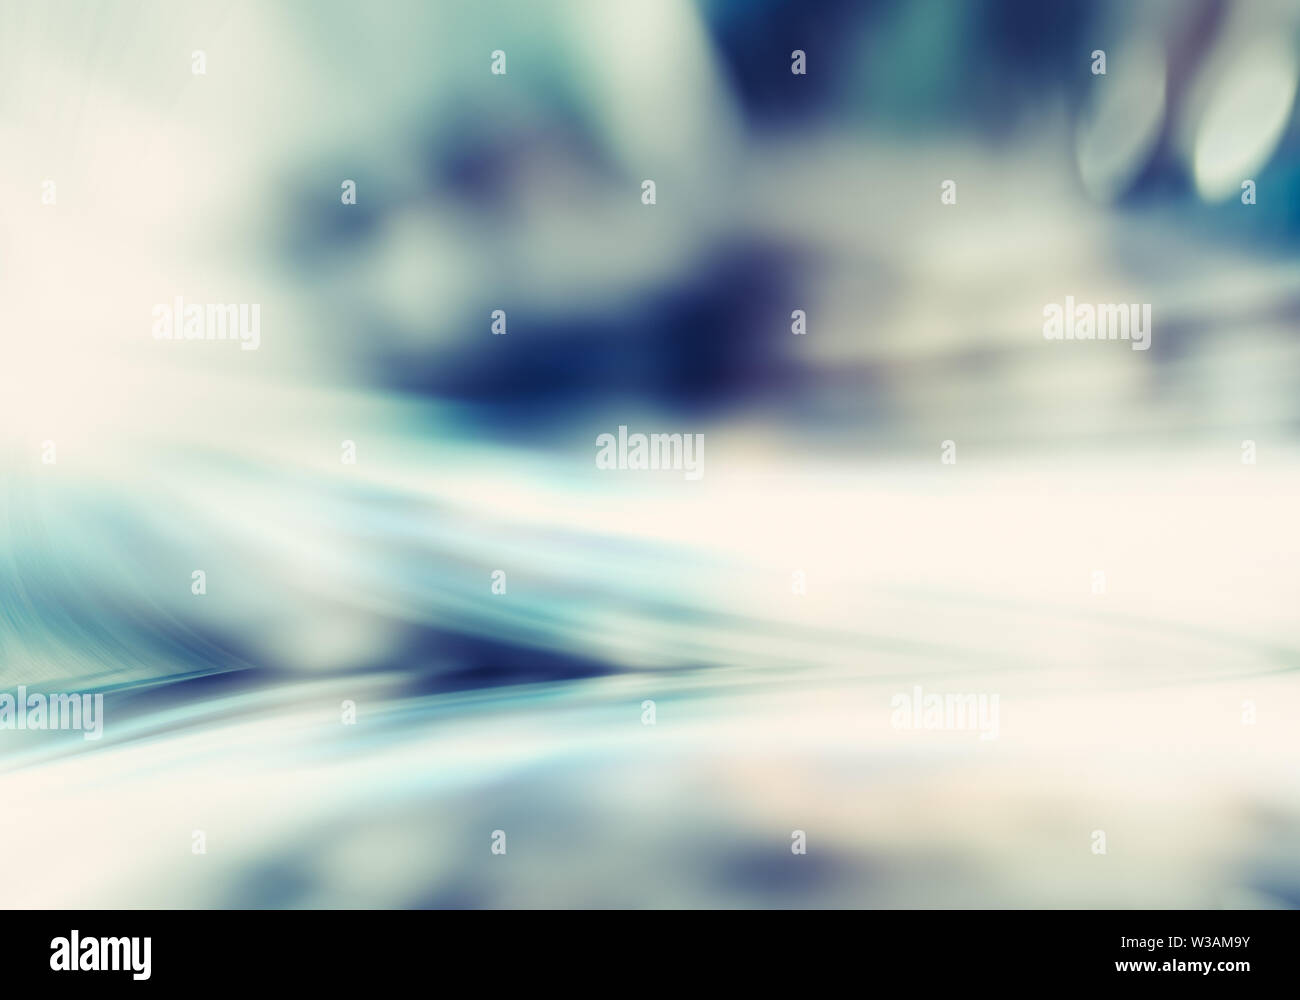 Room reflections motion blur futuristic background Stock Photo